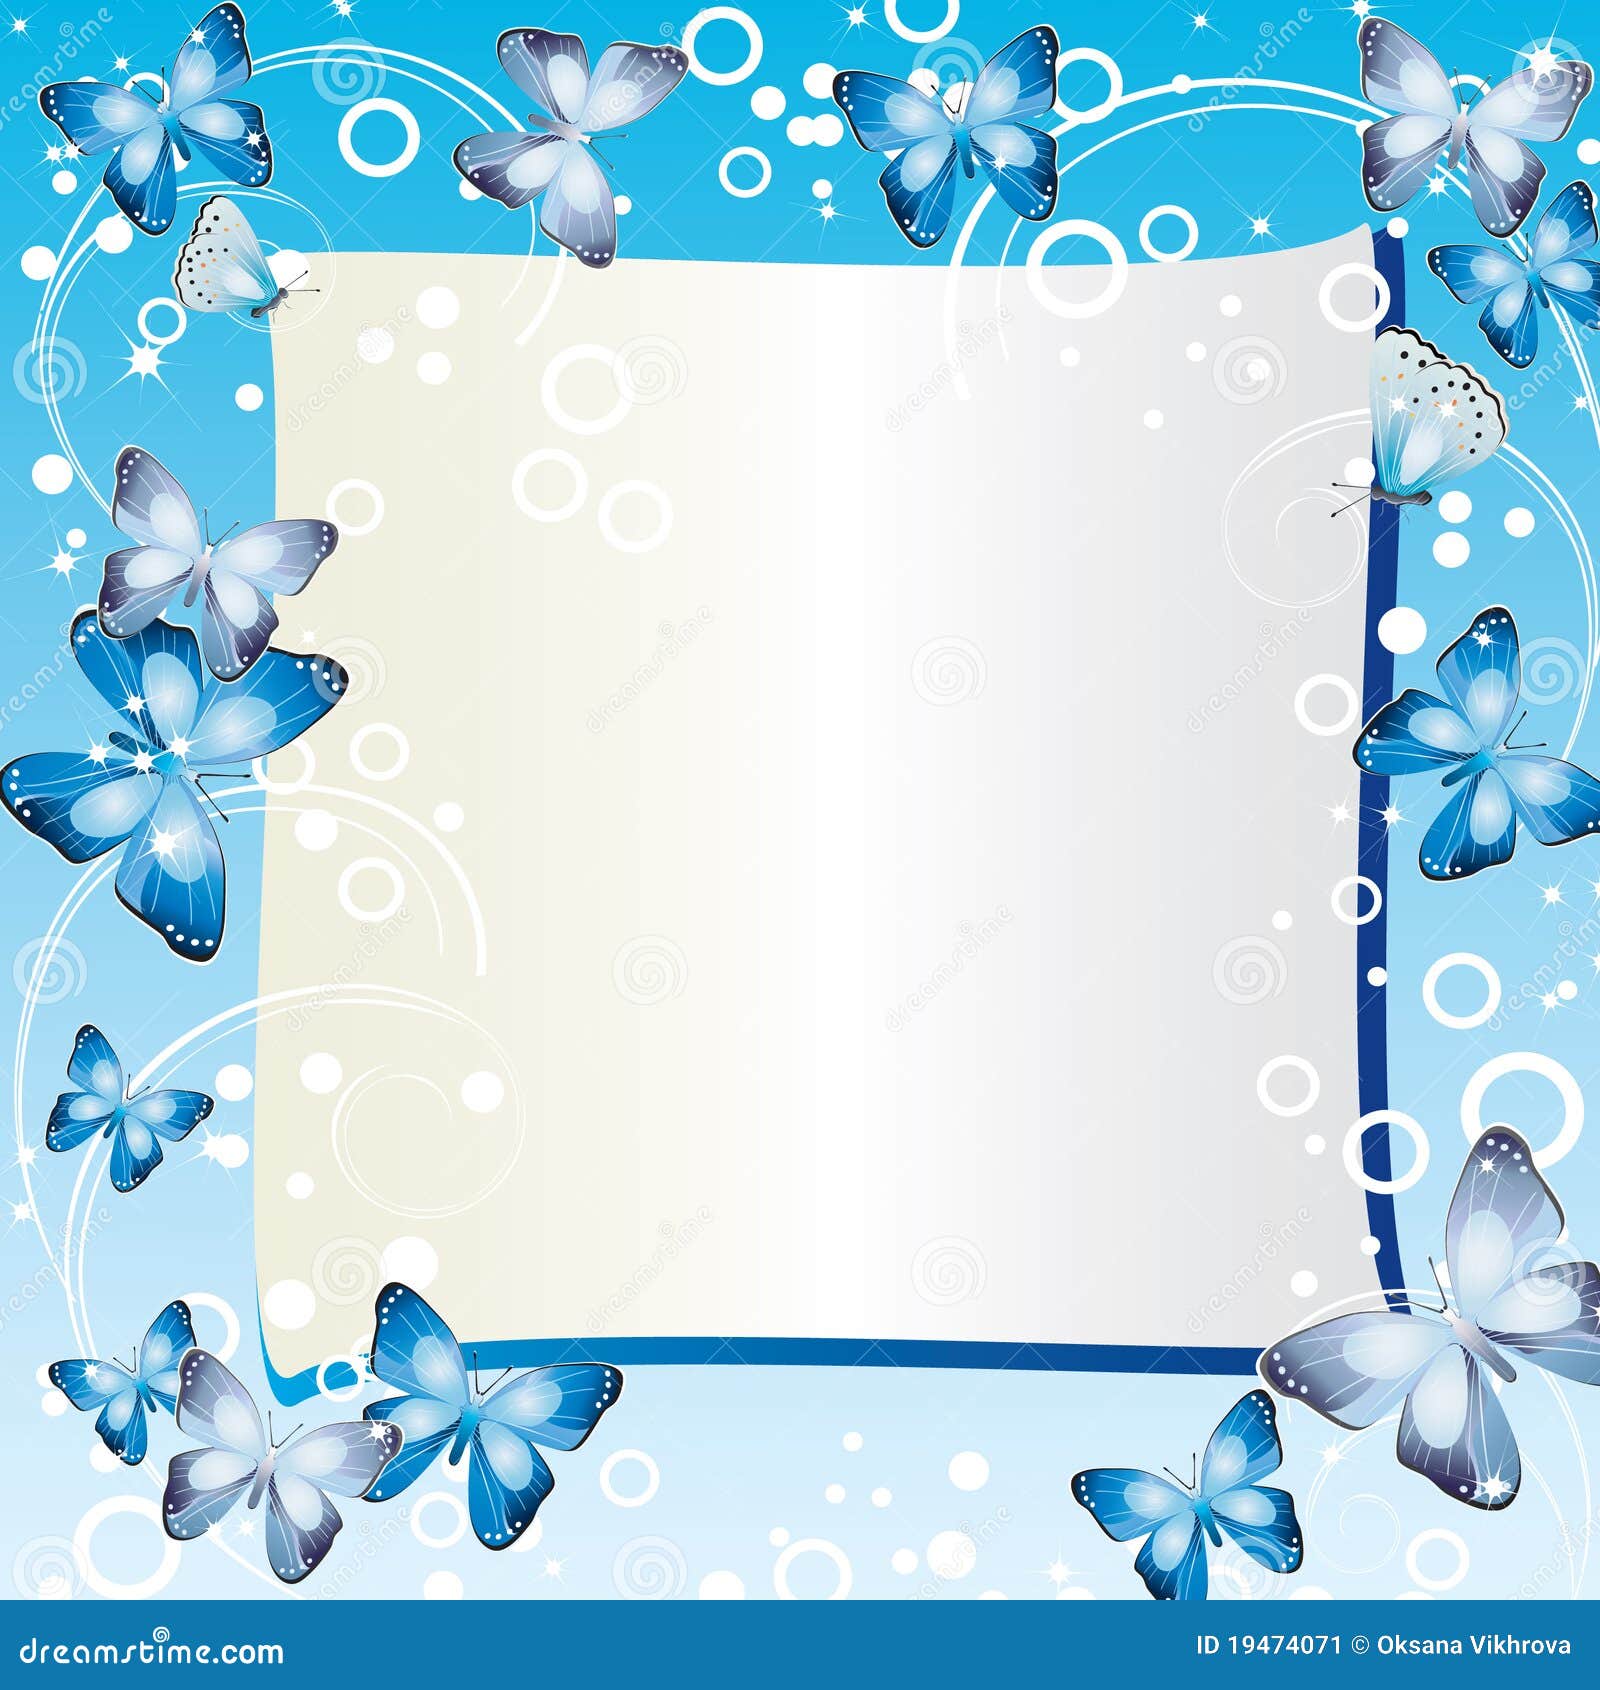 Frame with butterflies. stock vector. Illustration of abstract - 19474071